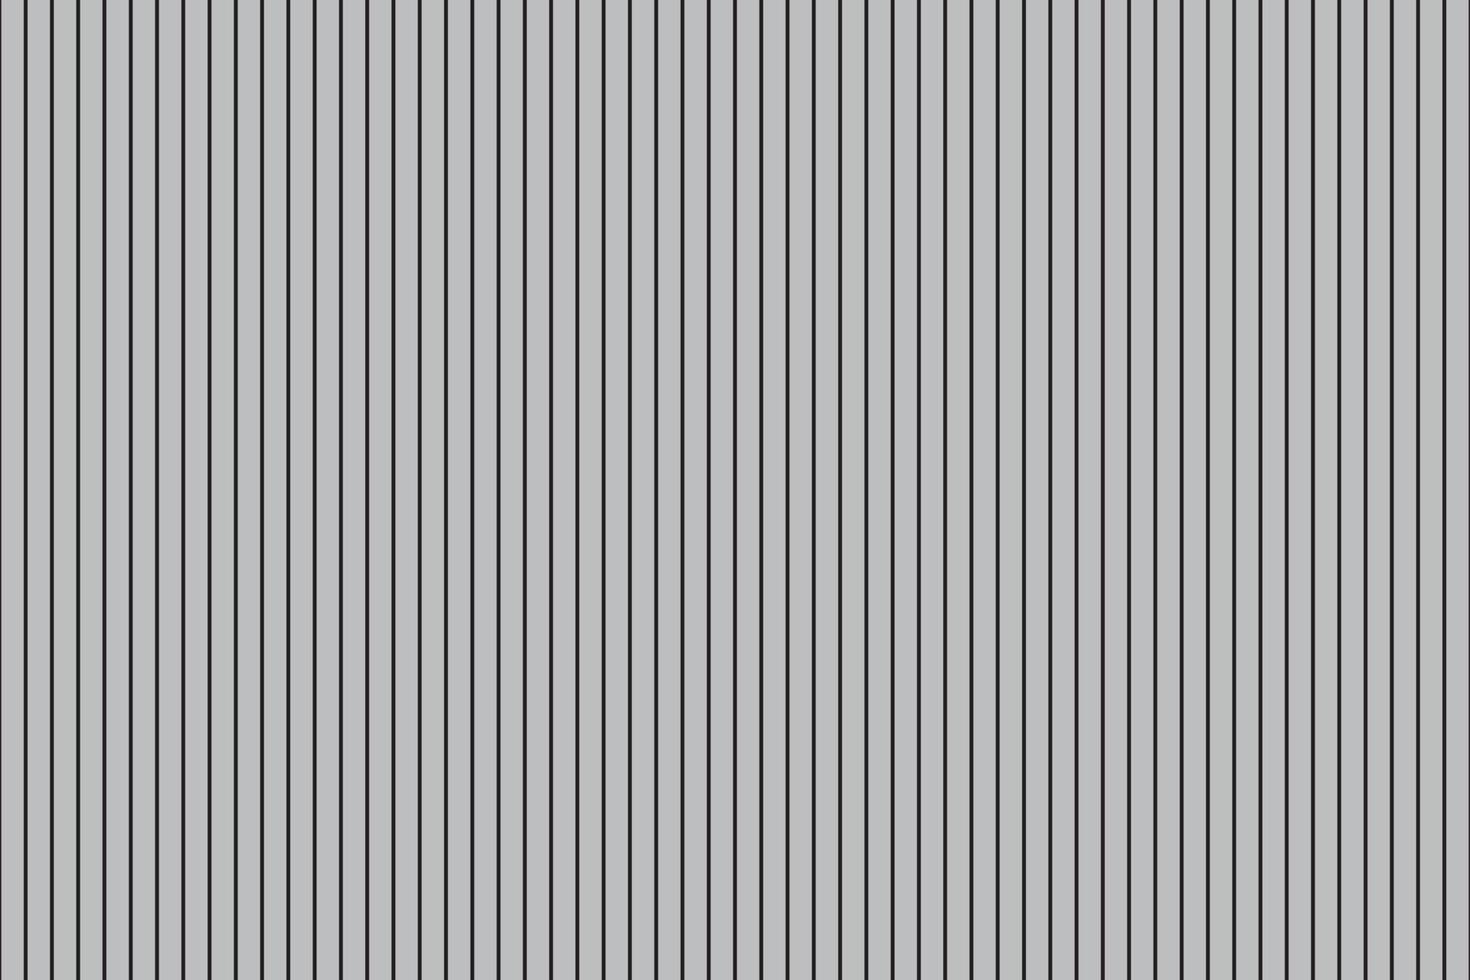 digonal wavy abstract simple black pattern on grey background. vector